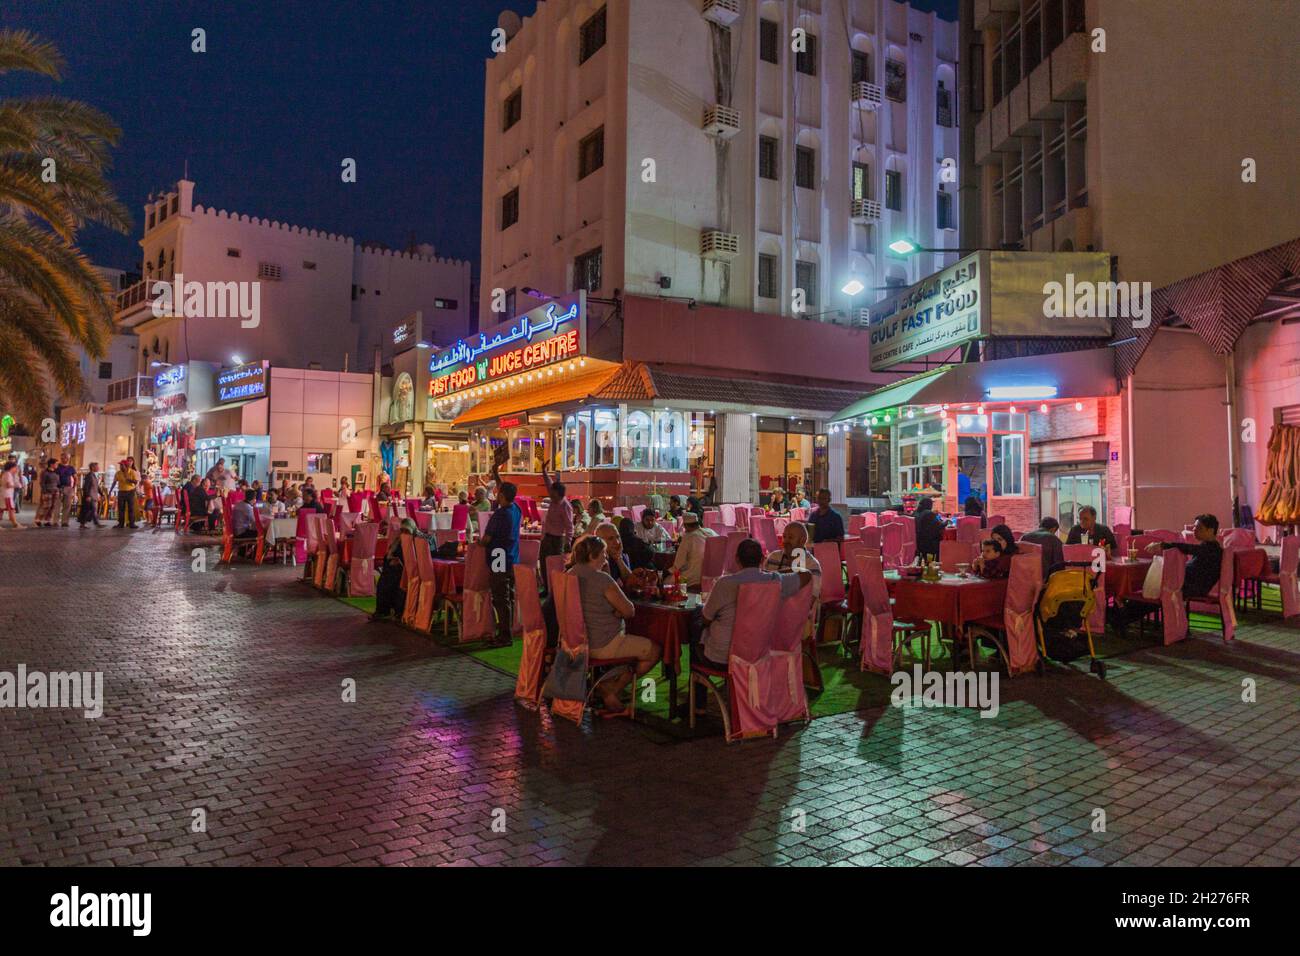 MUSCAT, OMAN - FEBRUARY 22, 2017: Local fast food restaurants in Mutrah district of Muscat, Oman Stock Photo